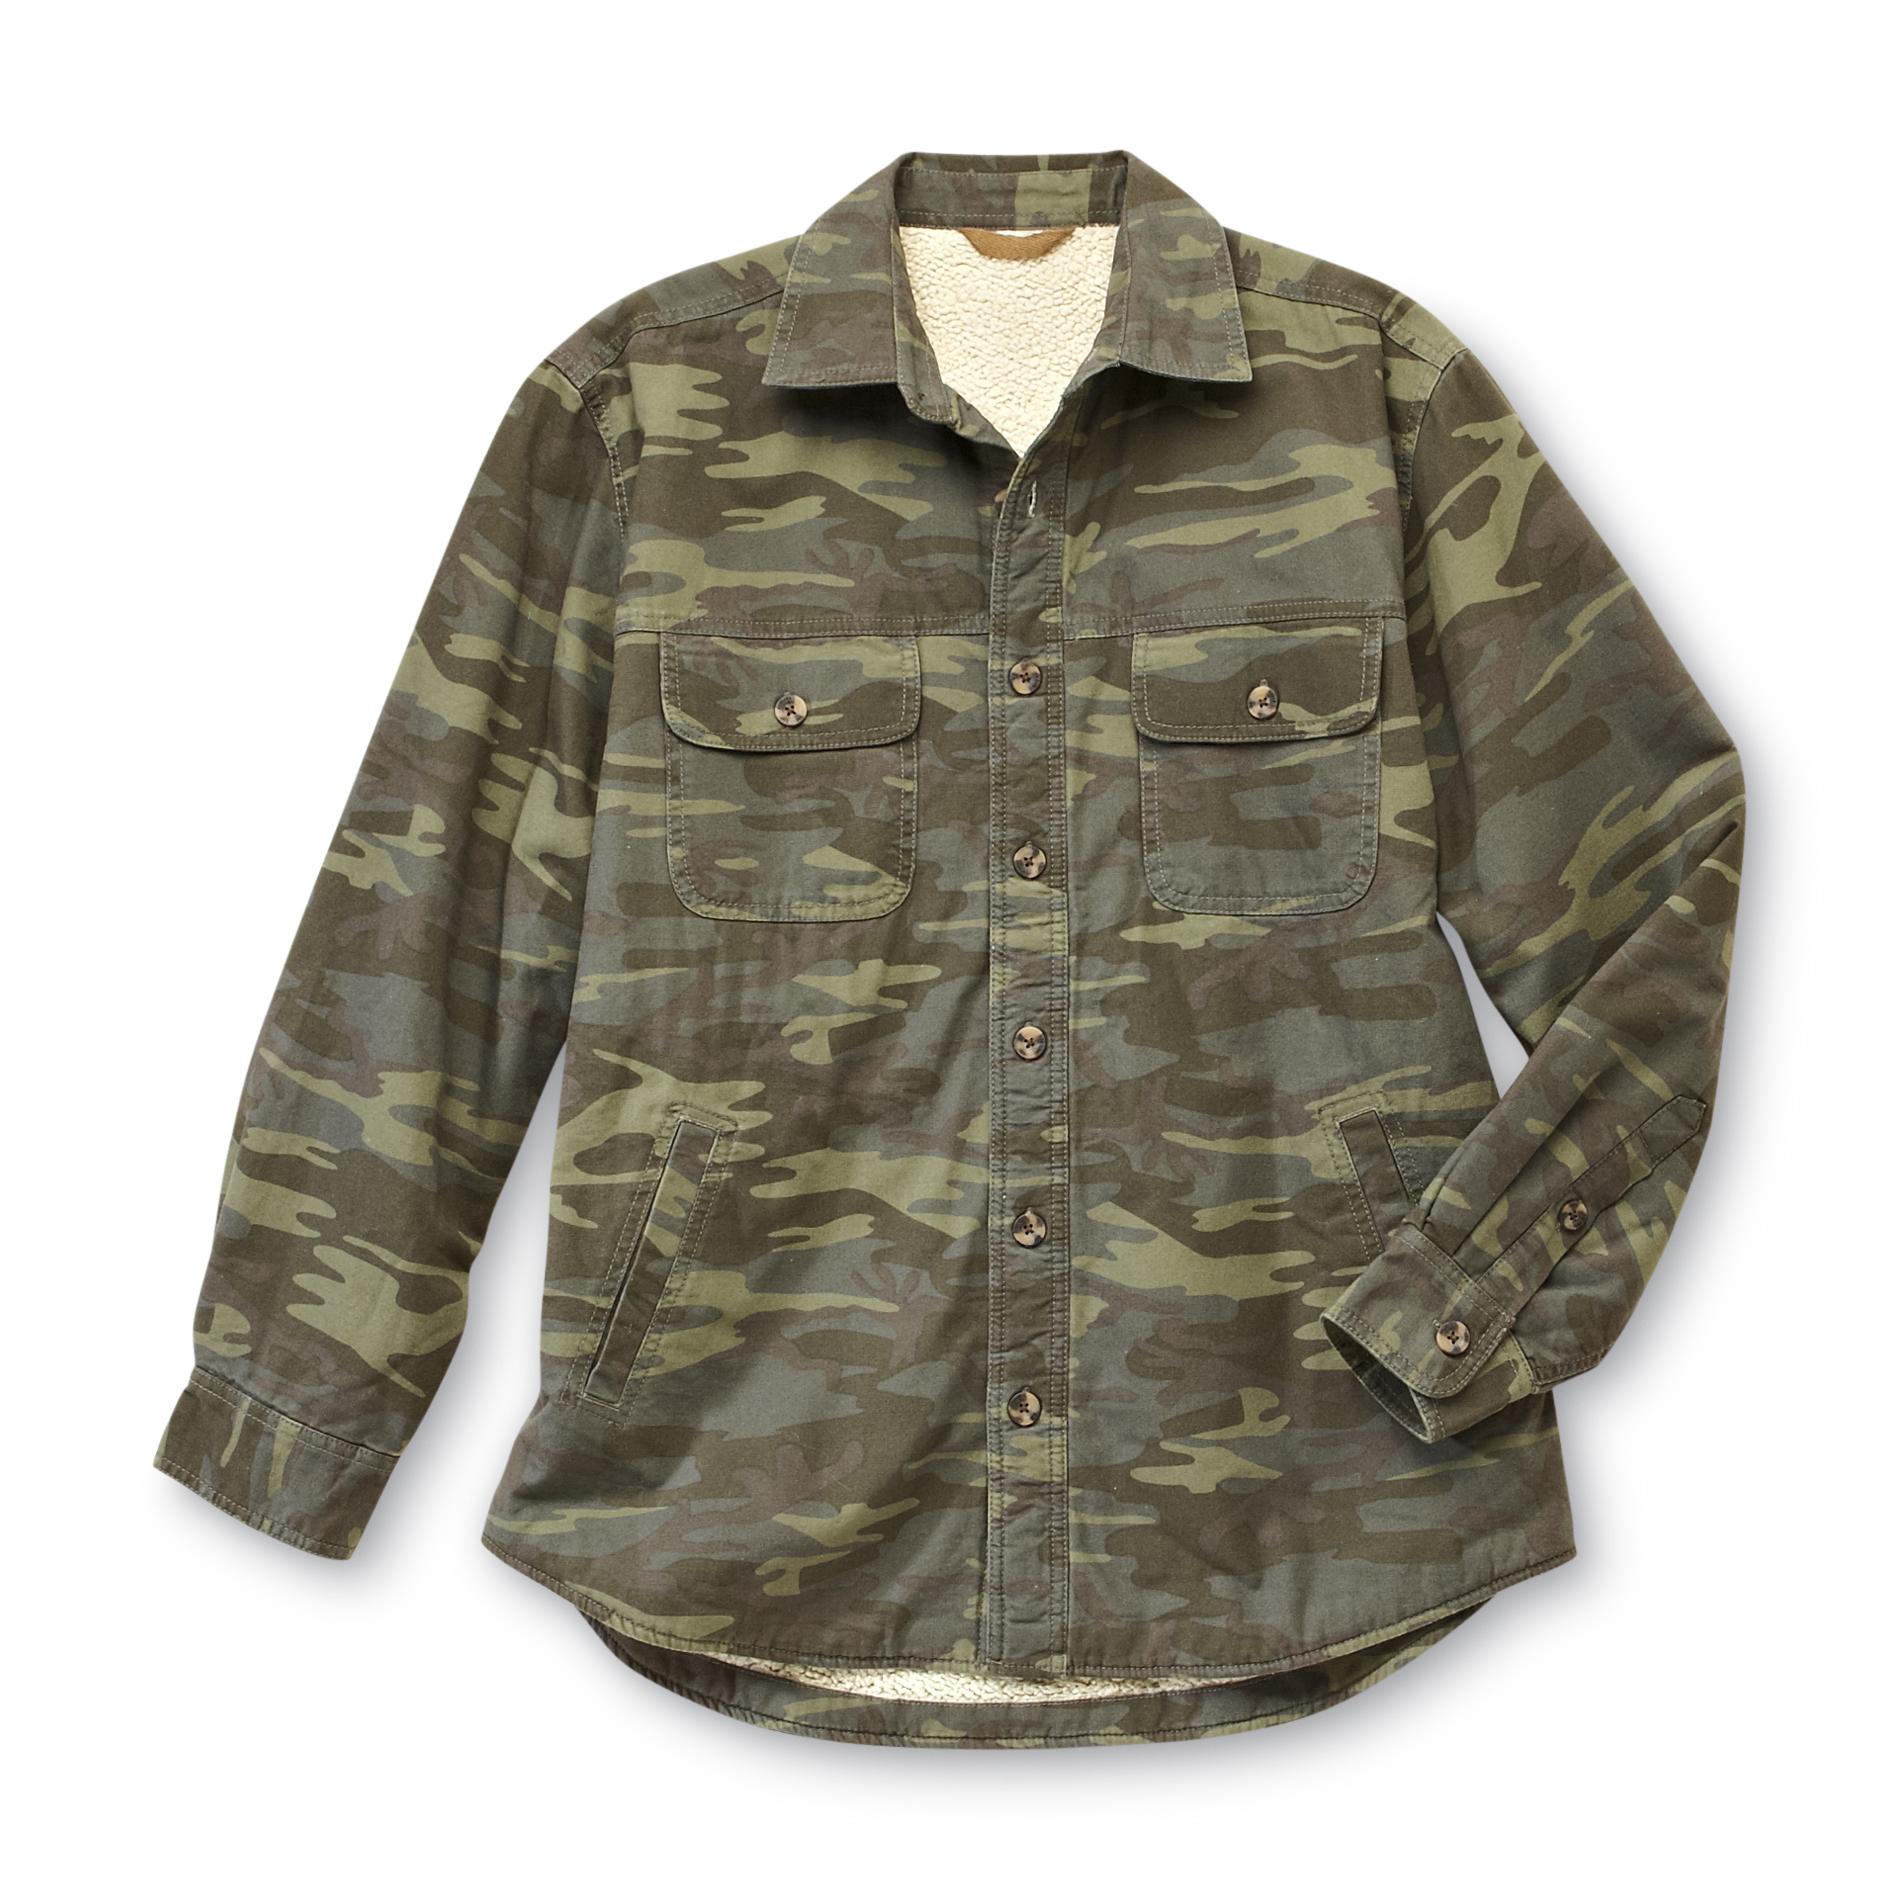 Outdoor Life Men's Canvas Shirt Jacket - Camouflage